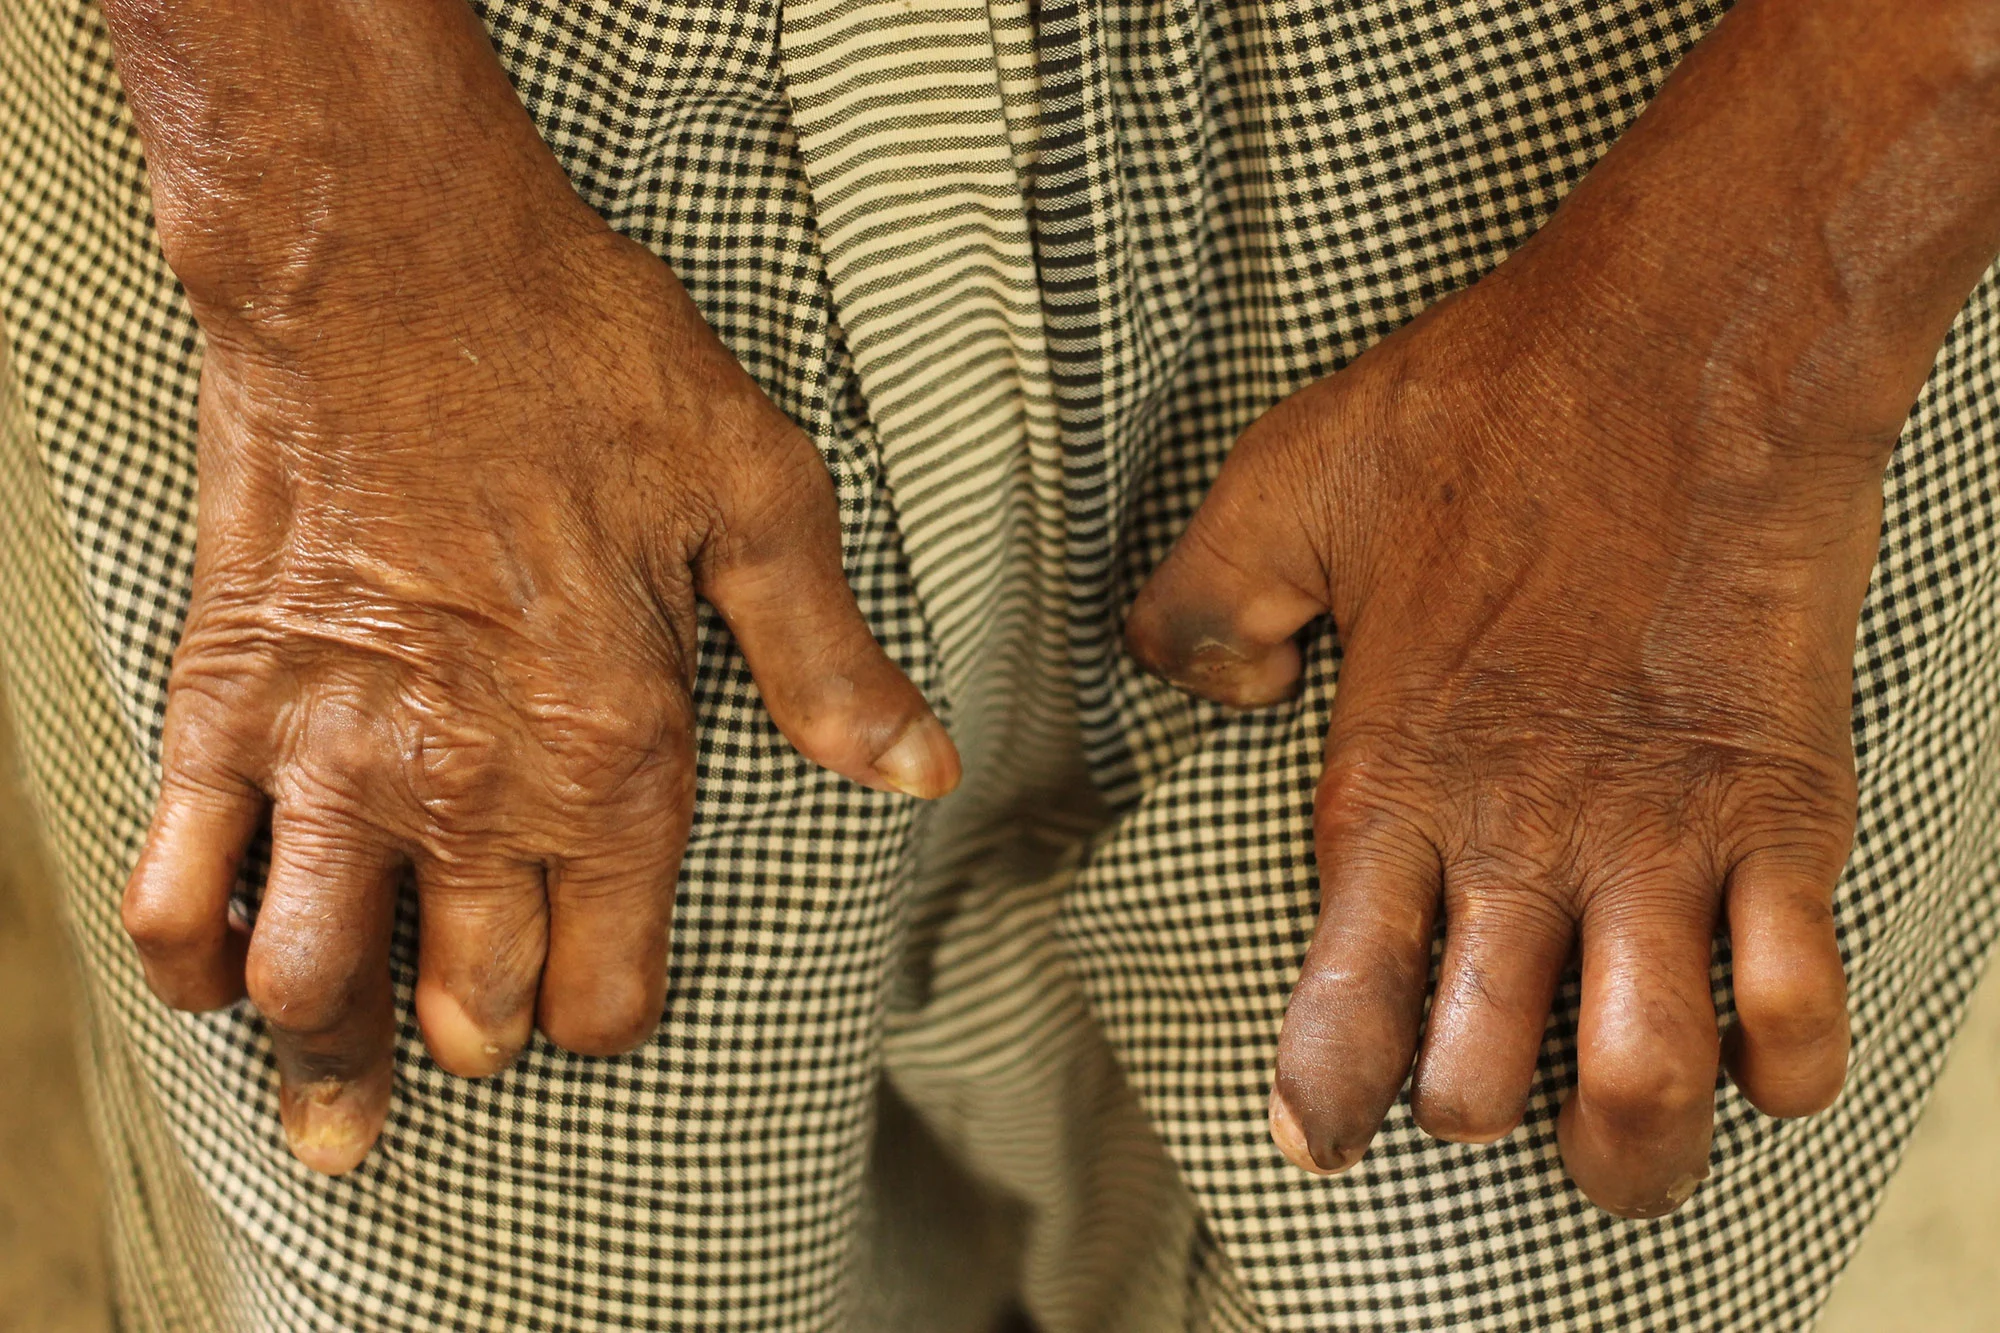 16 districts of Nepal yet to be leprosy free